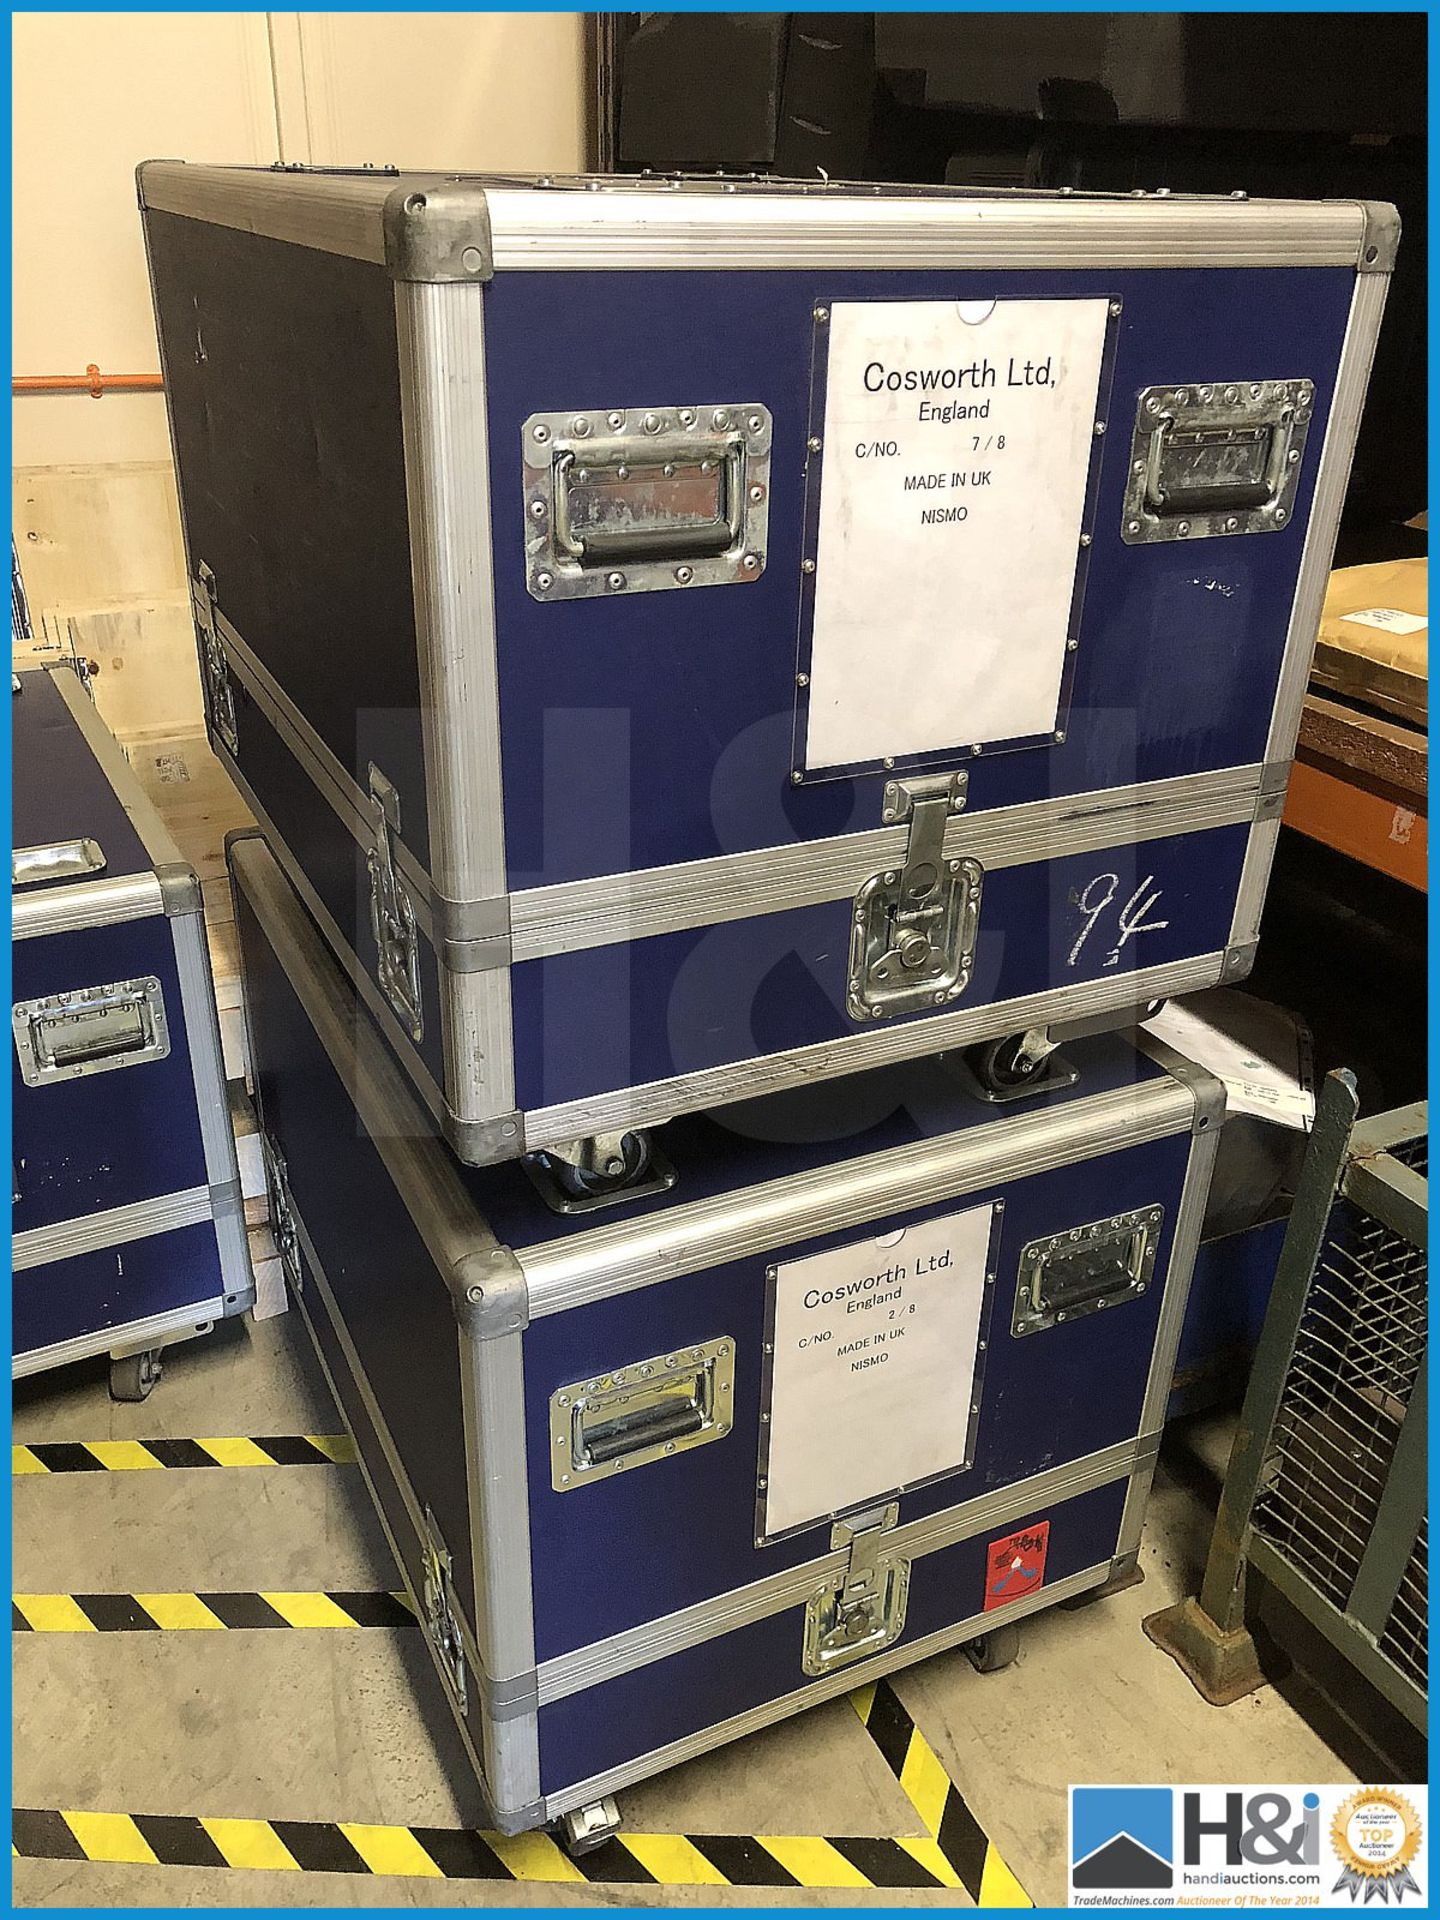 Quentor engine flight case complete with loading skids. Appx 28in x 38in x 24in. Cost over GBP 1,400